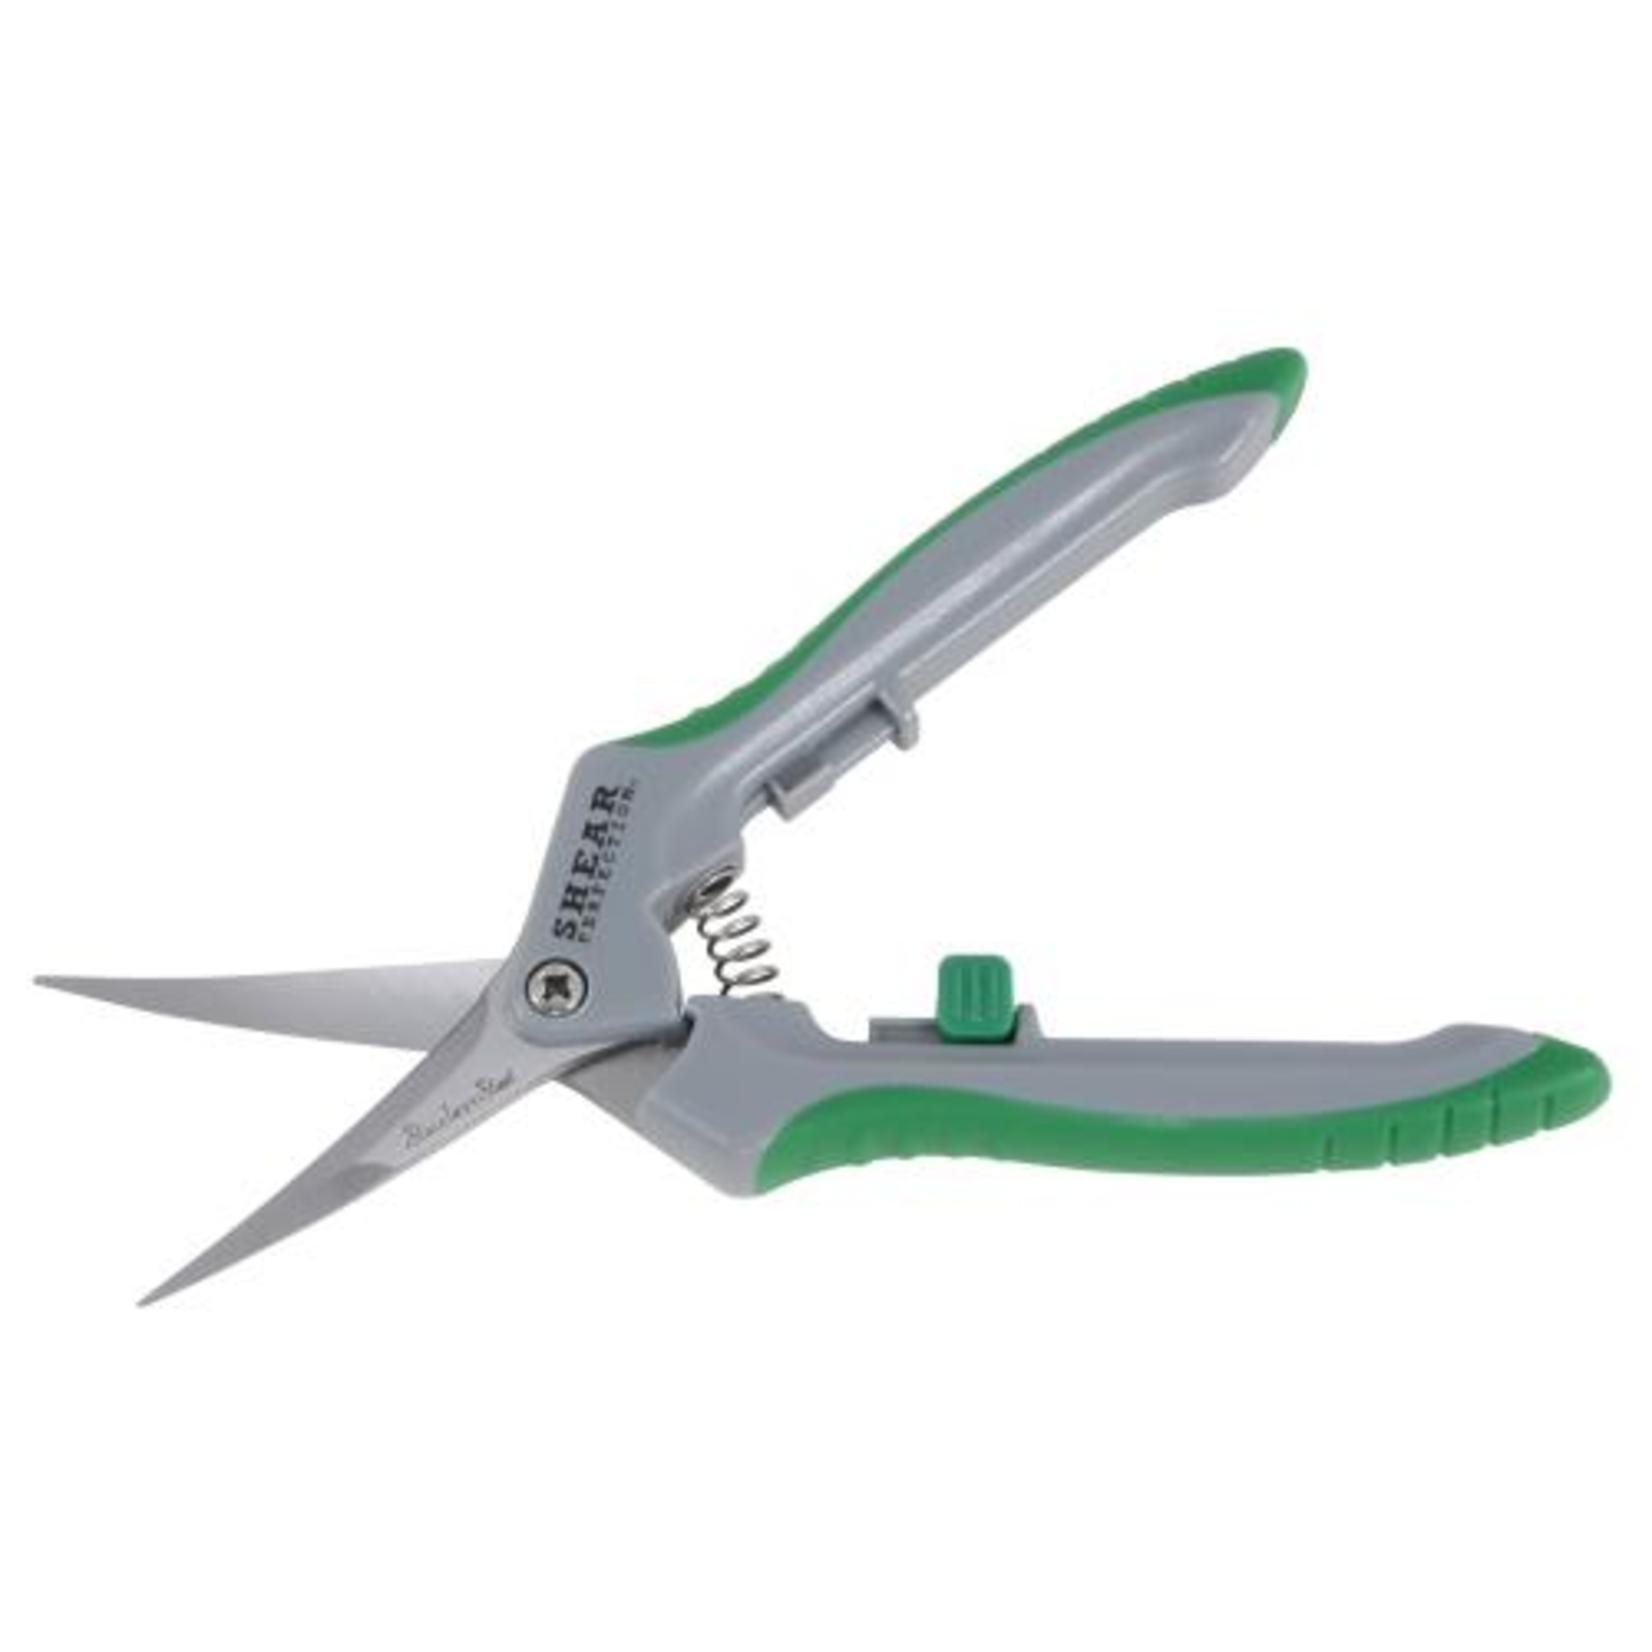 Shear Perfection Shear Perfection Platinum Stainless Trimming Shear - 2 in Curved Blades (12/Cs)